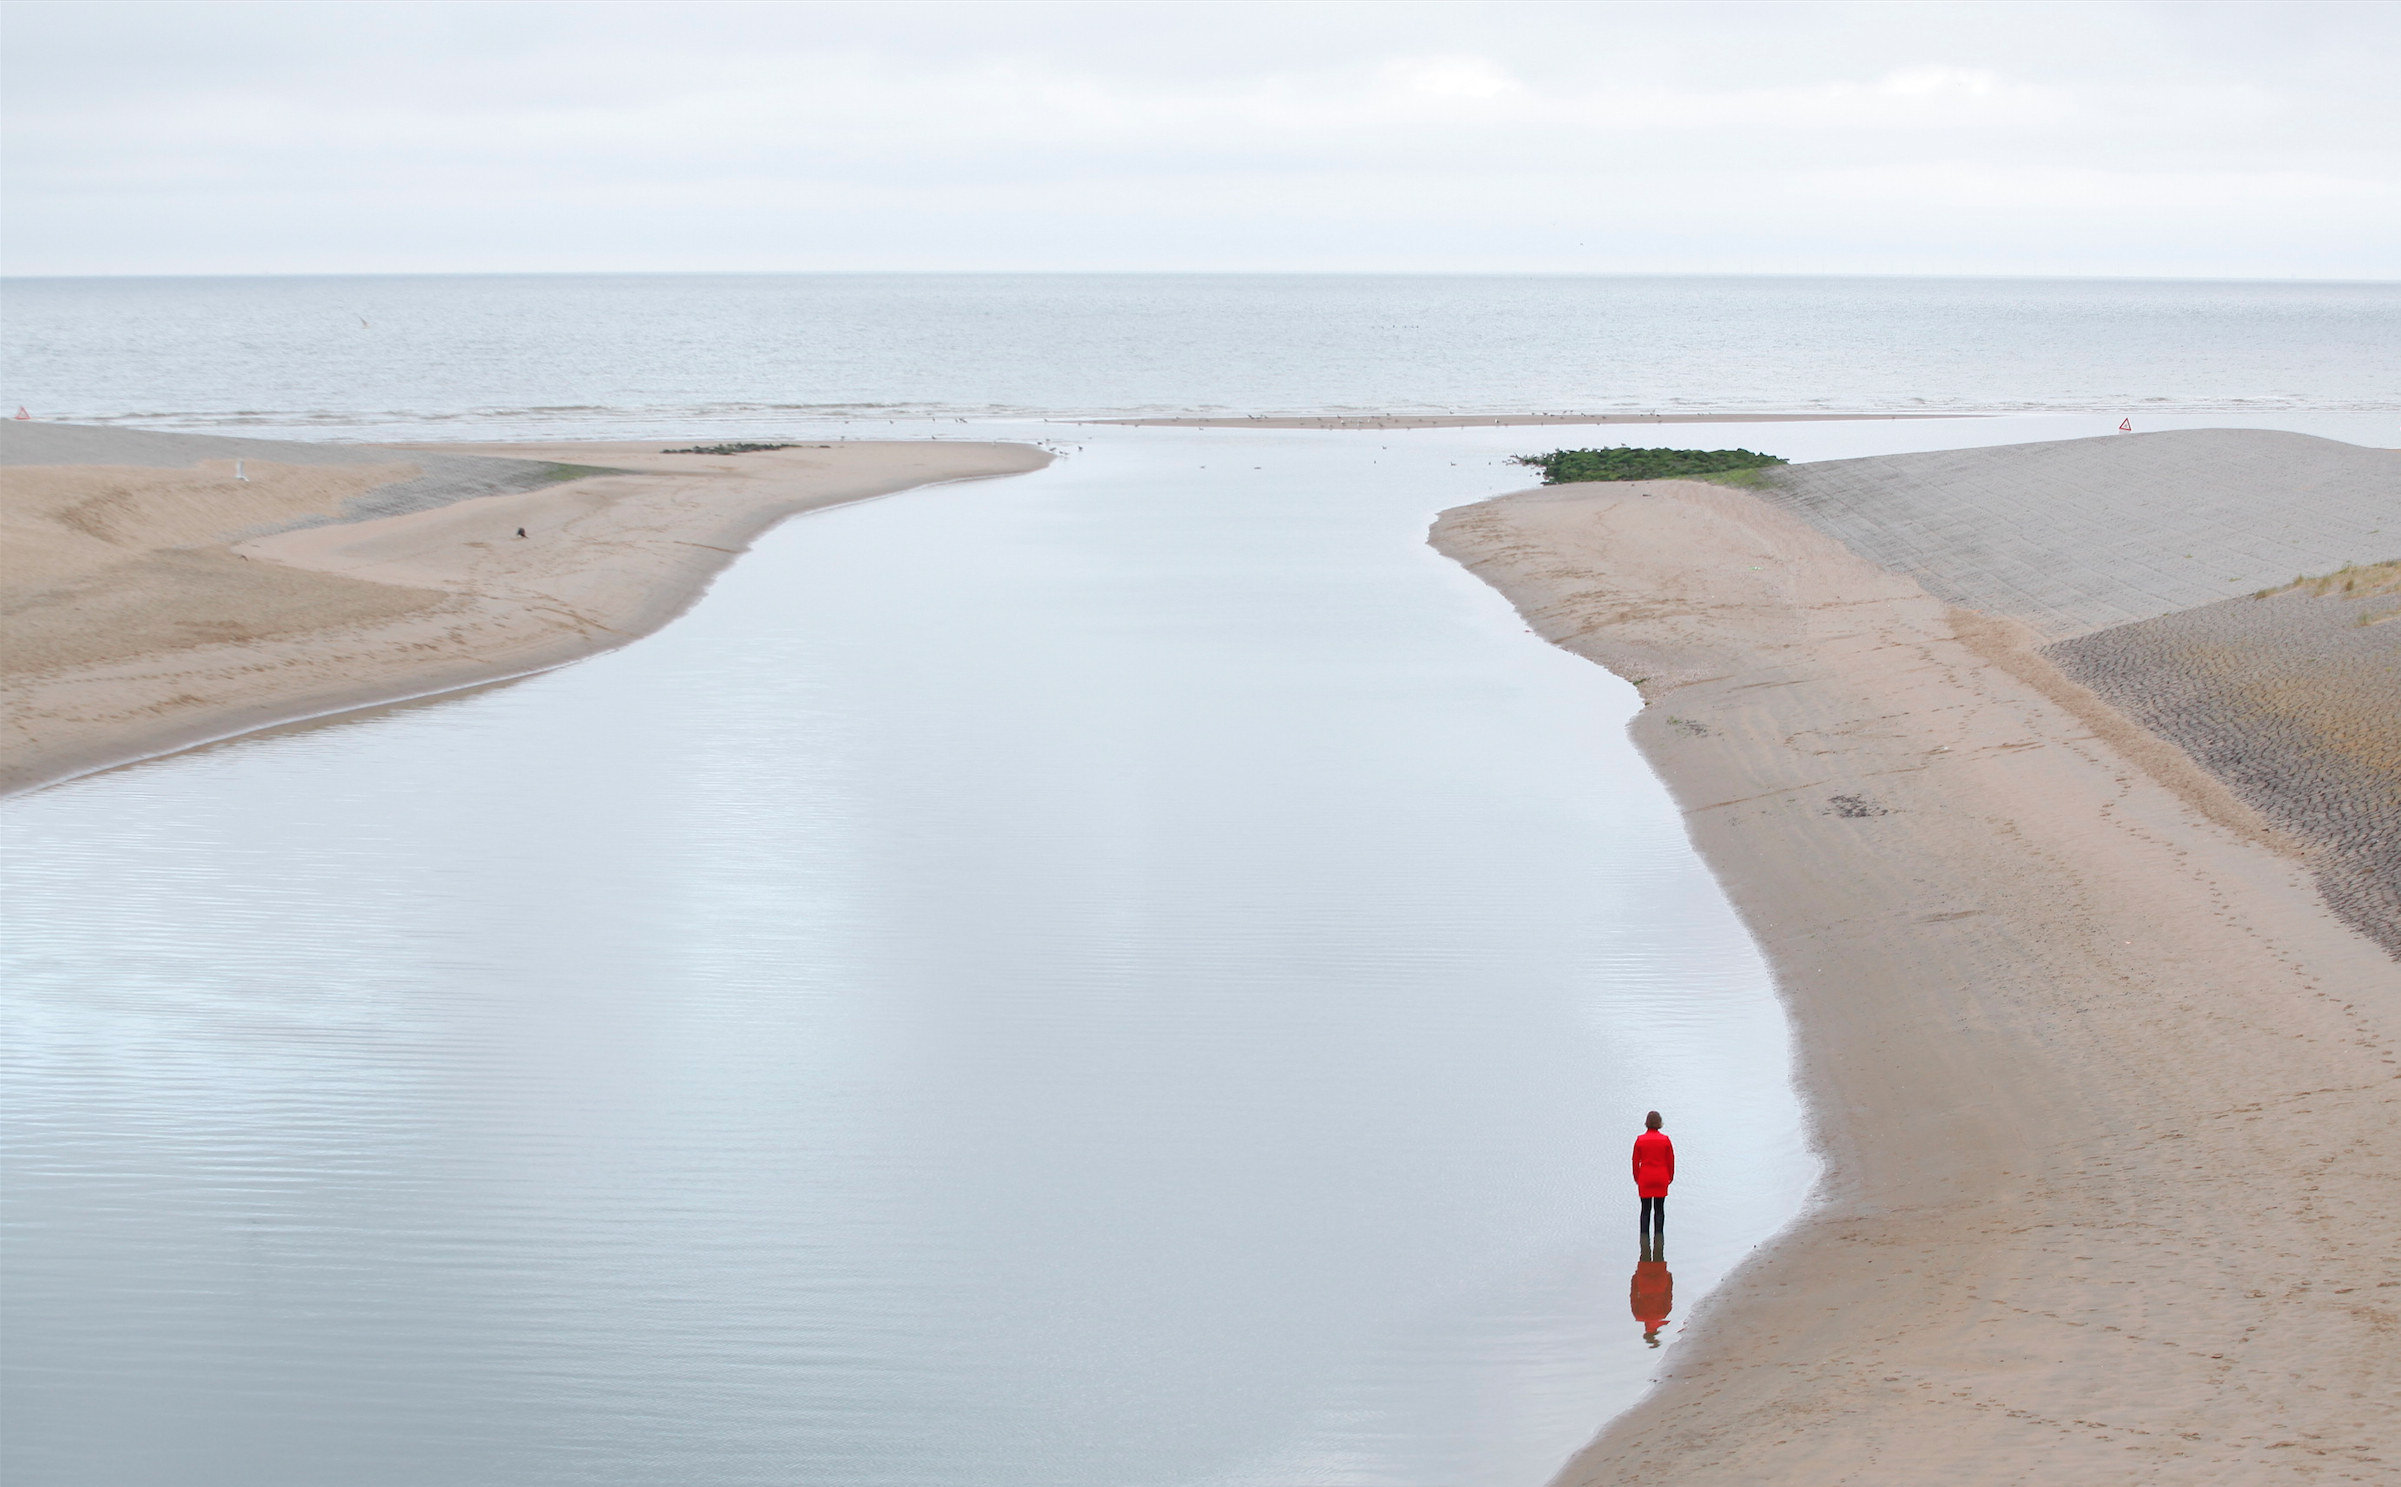 Person in red shirt stands in water looking out at the vast sea